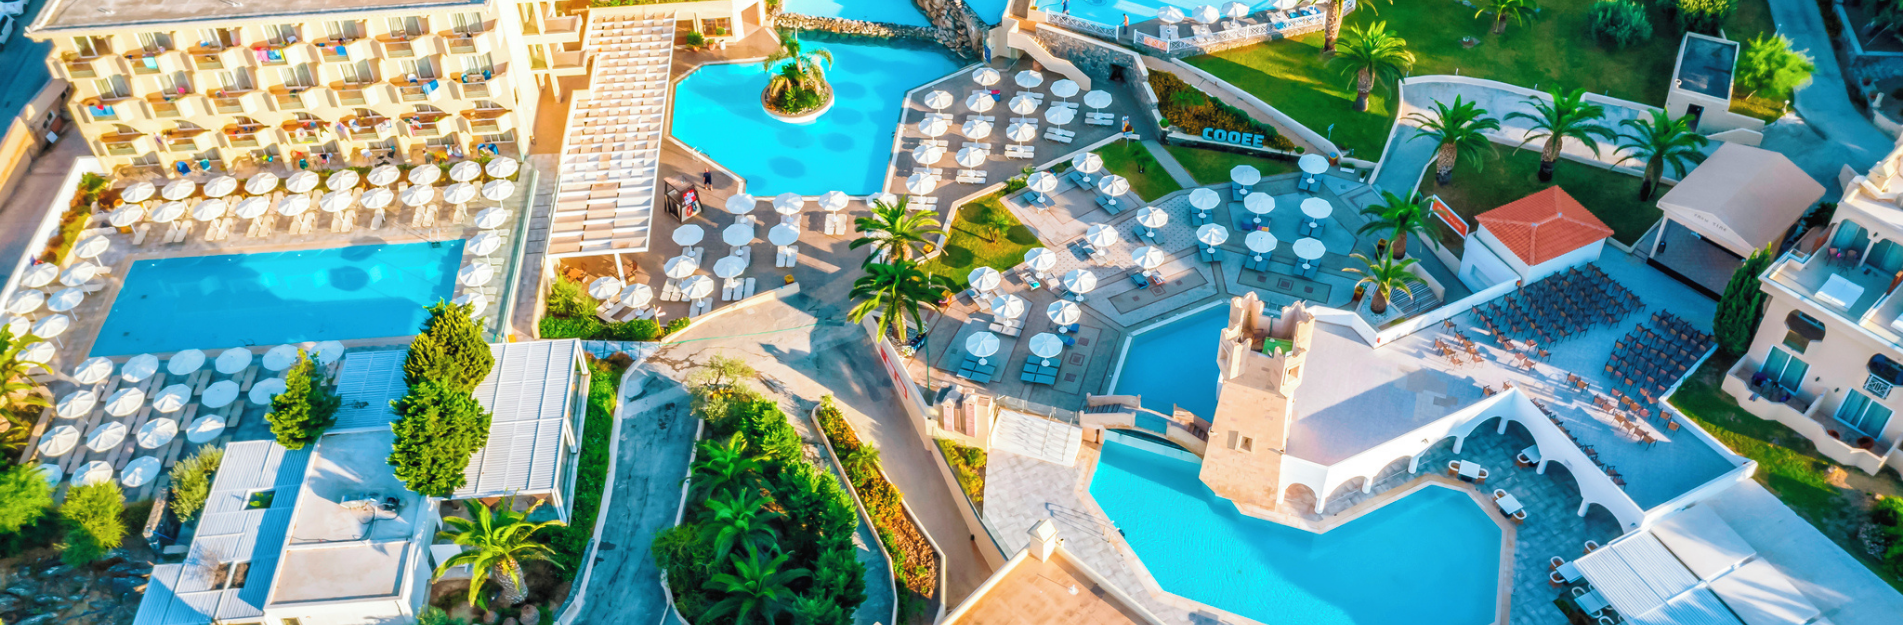 Win a 4* holiday to Lindos Royal, Rhodes with Jet2holidays